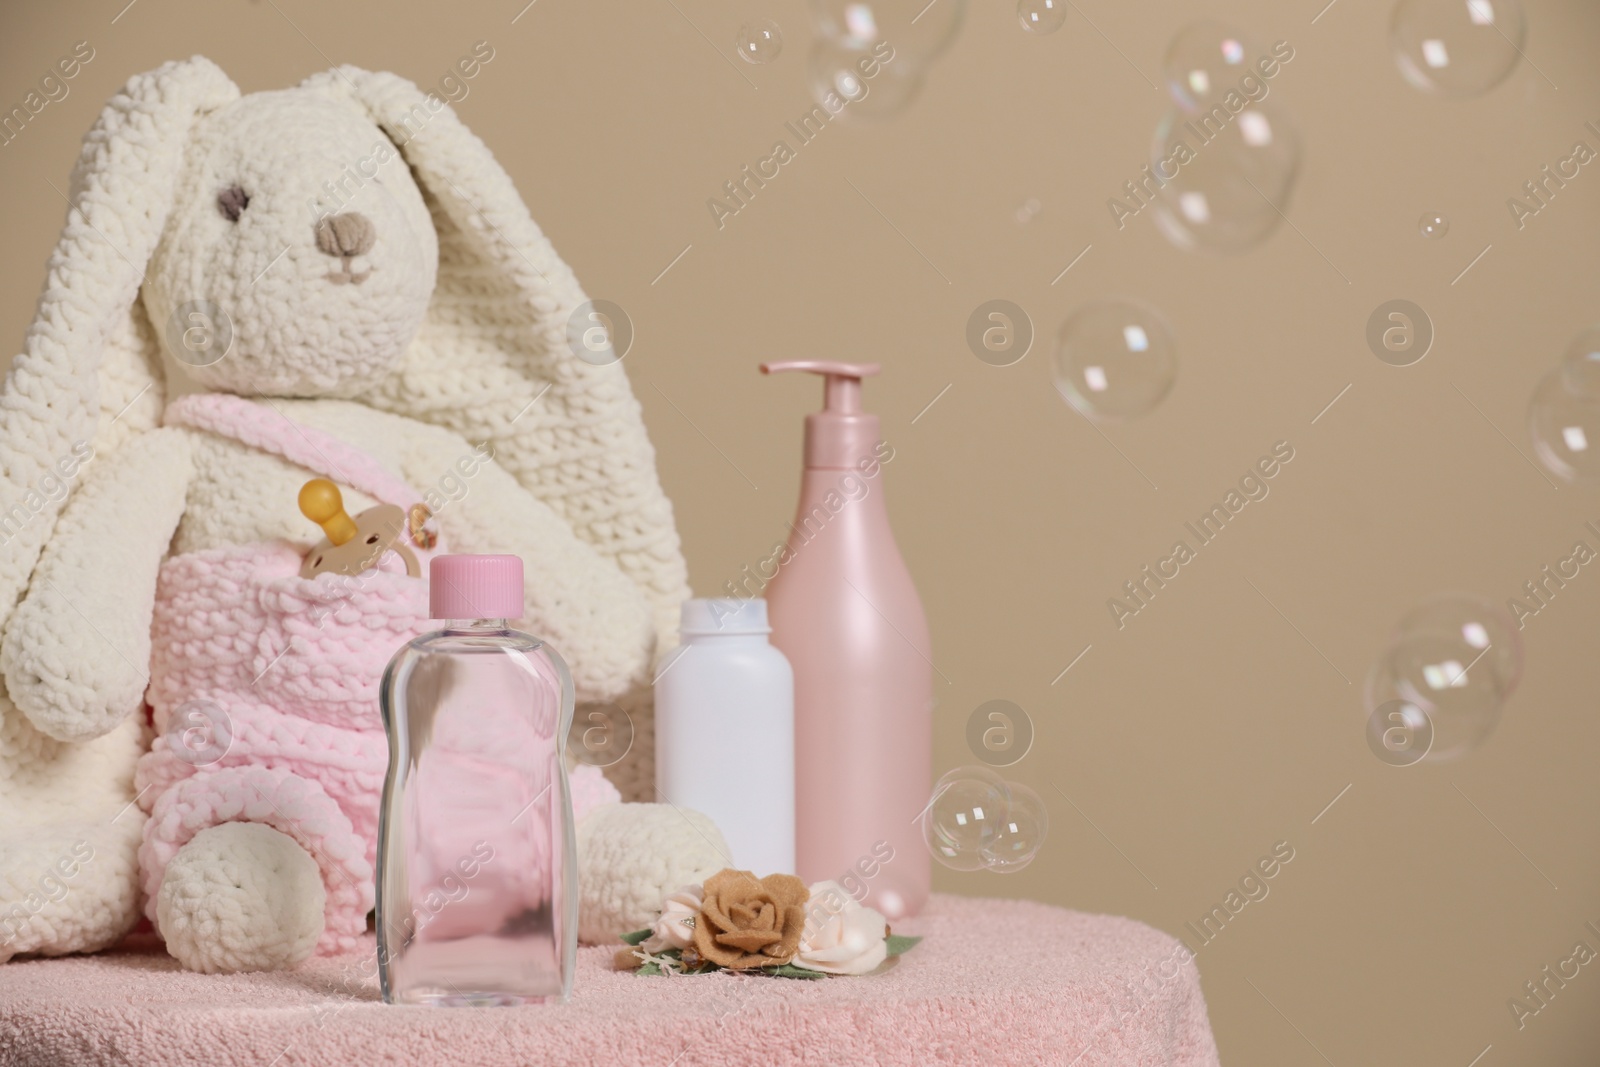 Photo of Baby cosmetic products, toy bunny, accessories and soap bubbles on beige background. Space for text